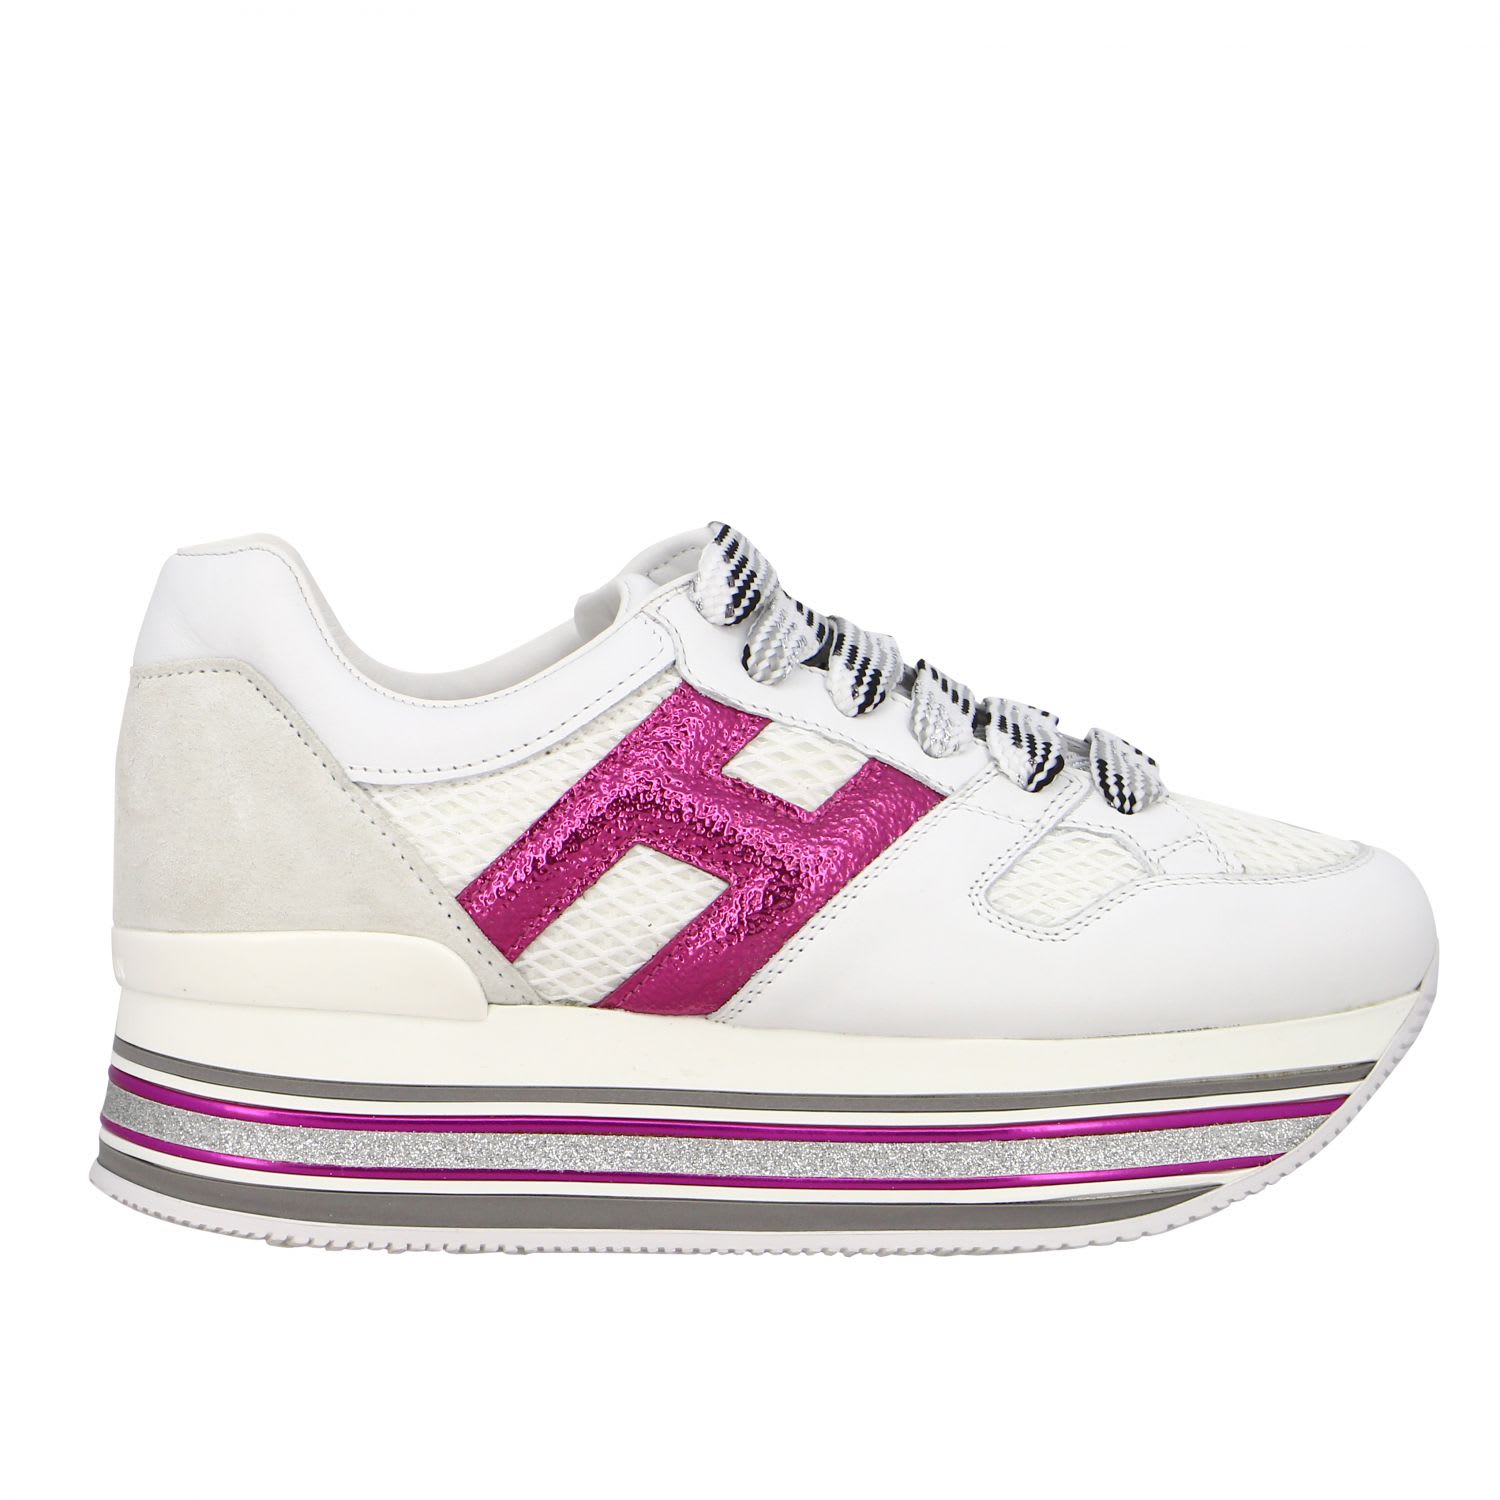 Hogan 516 Maxi Platform Sneakers In Leather And Mesh With Big H Laminate And Glitter Piping In White